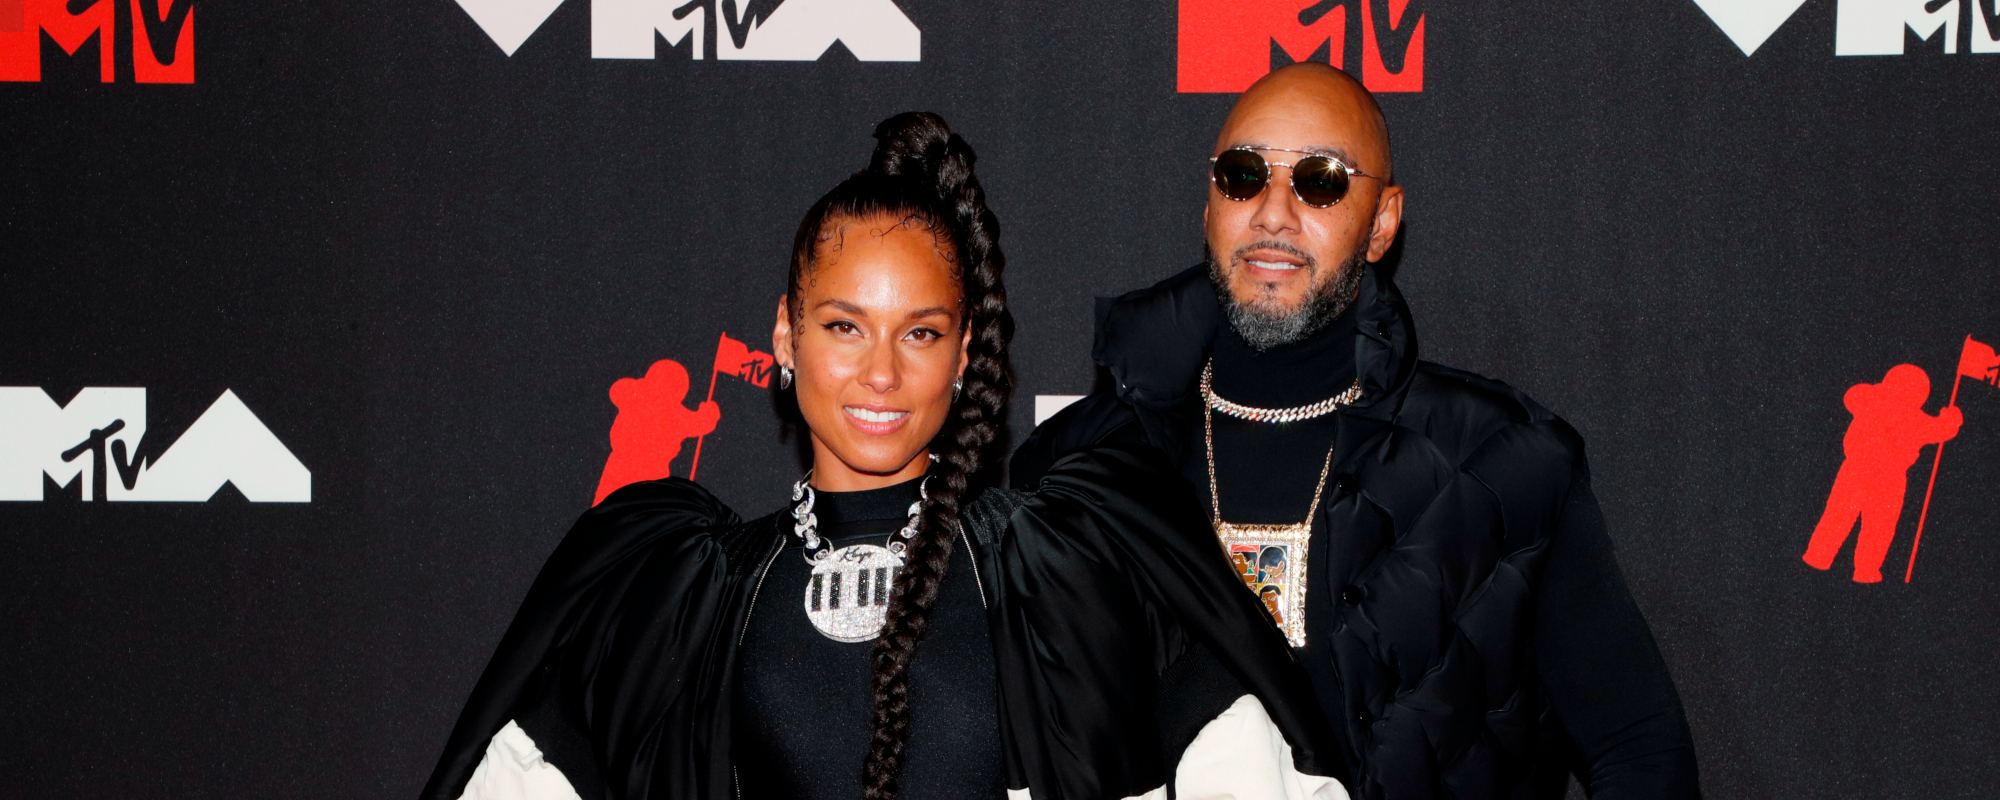 Behind the Musical Marriage: Alicia Keys and Swizz Beatz